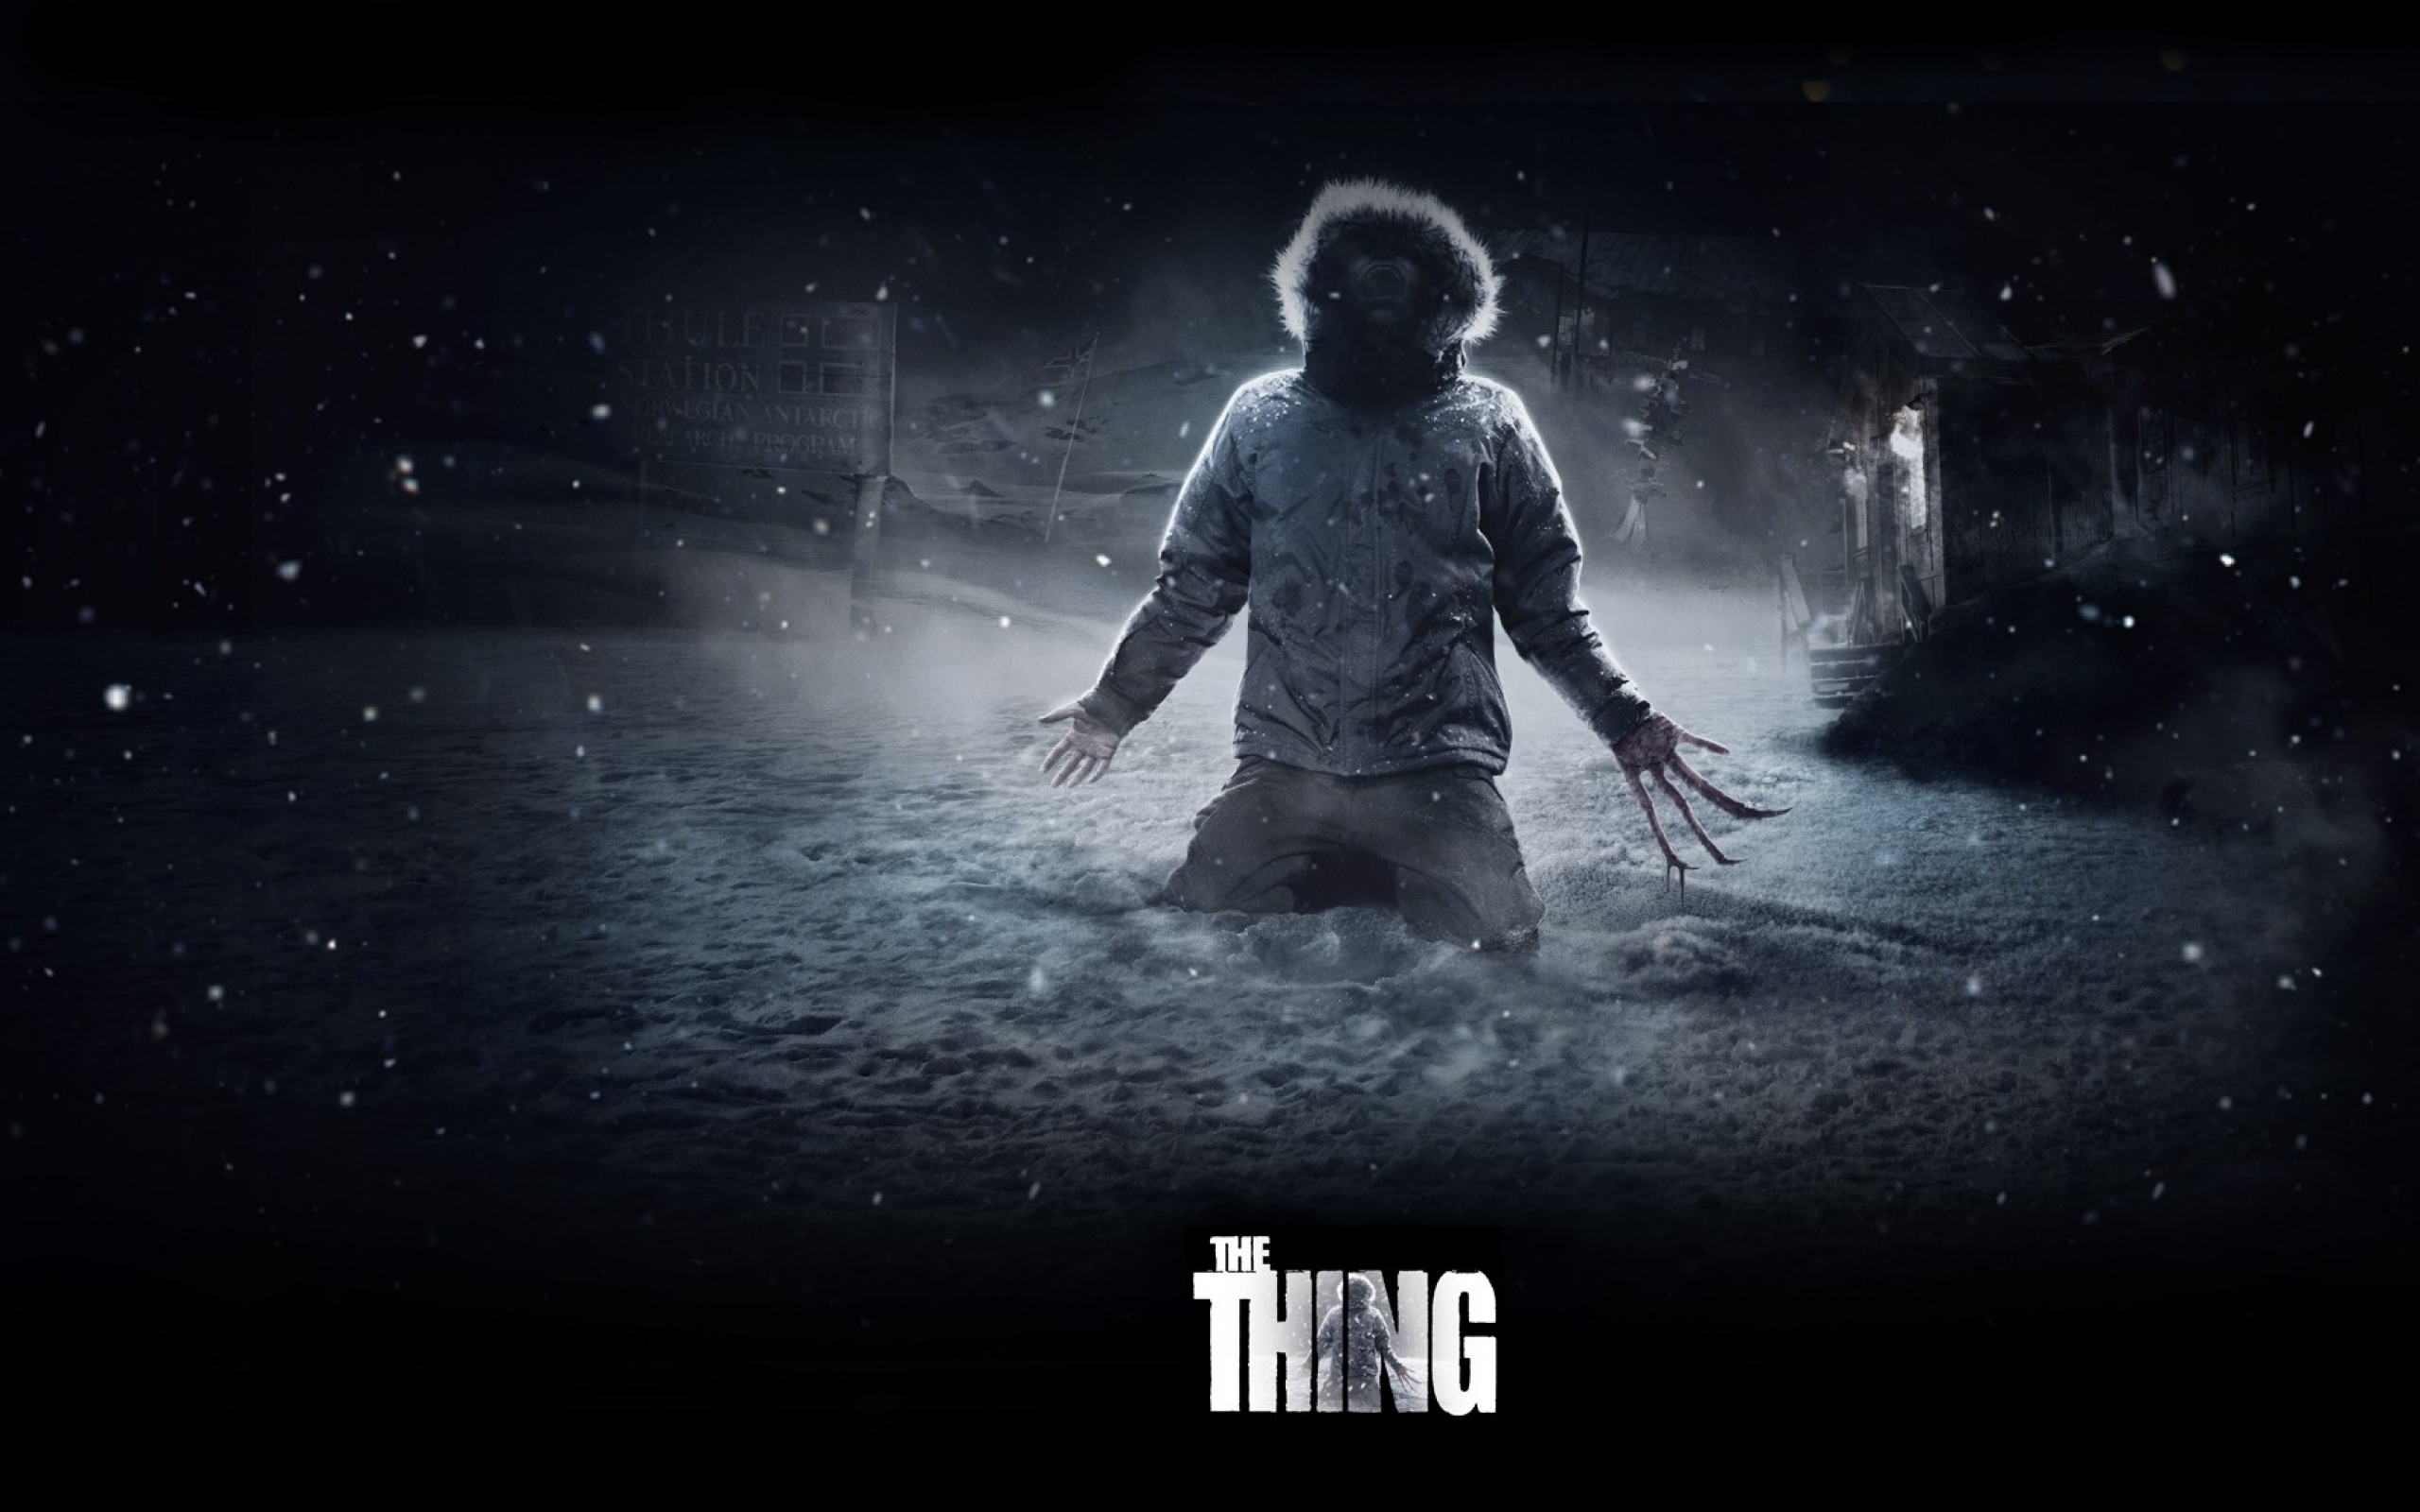 movie, the thing (2011) Image for desktop